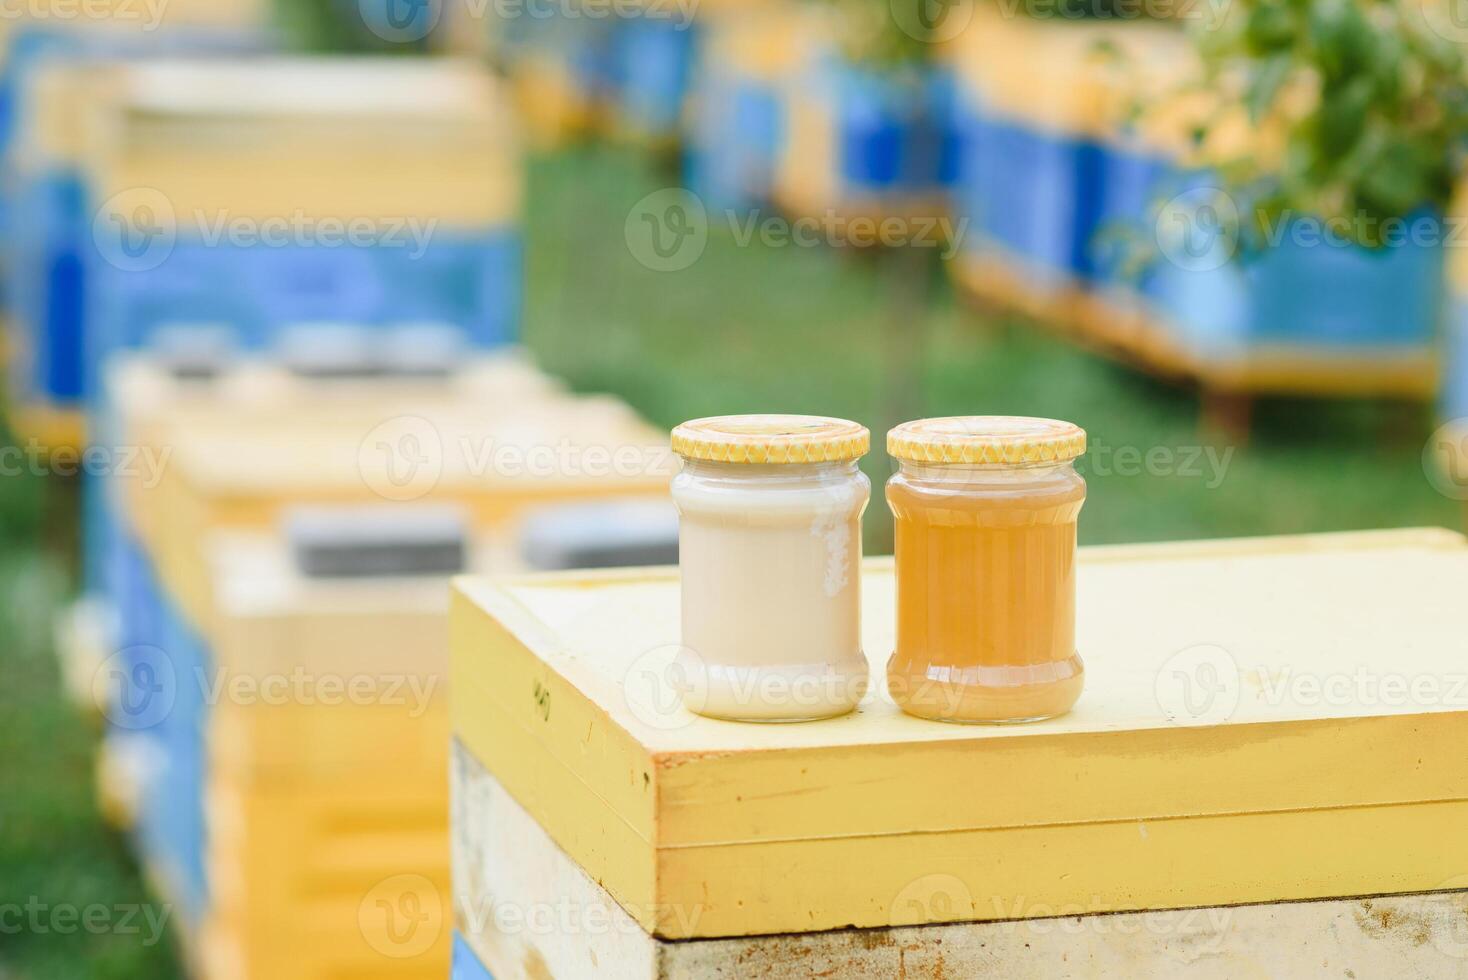 jar of fresh honey in a glass jar. Beekeeping concept. Top view. Copy space. photo